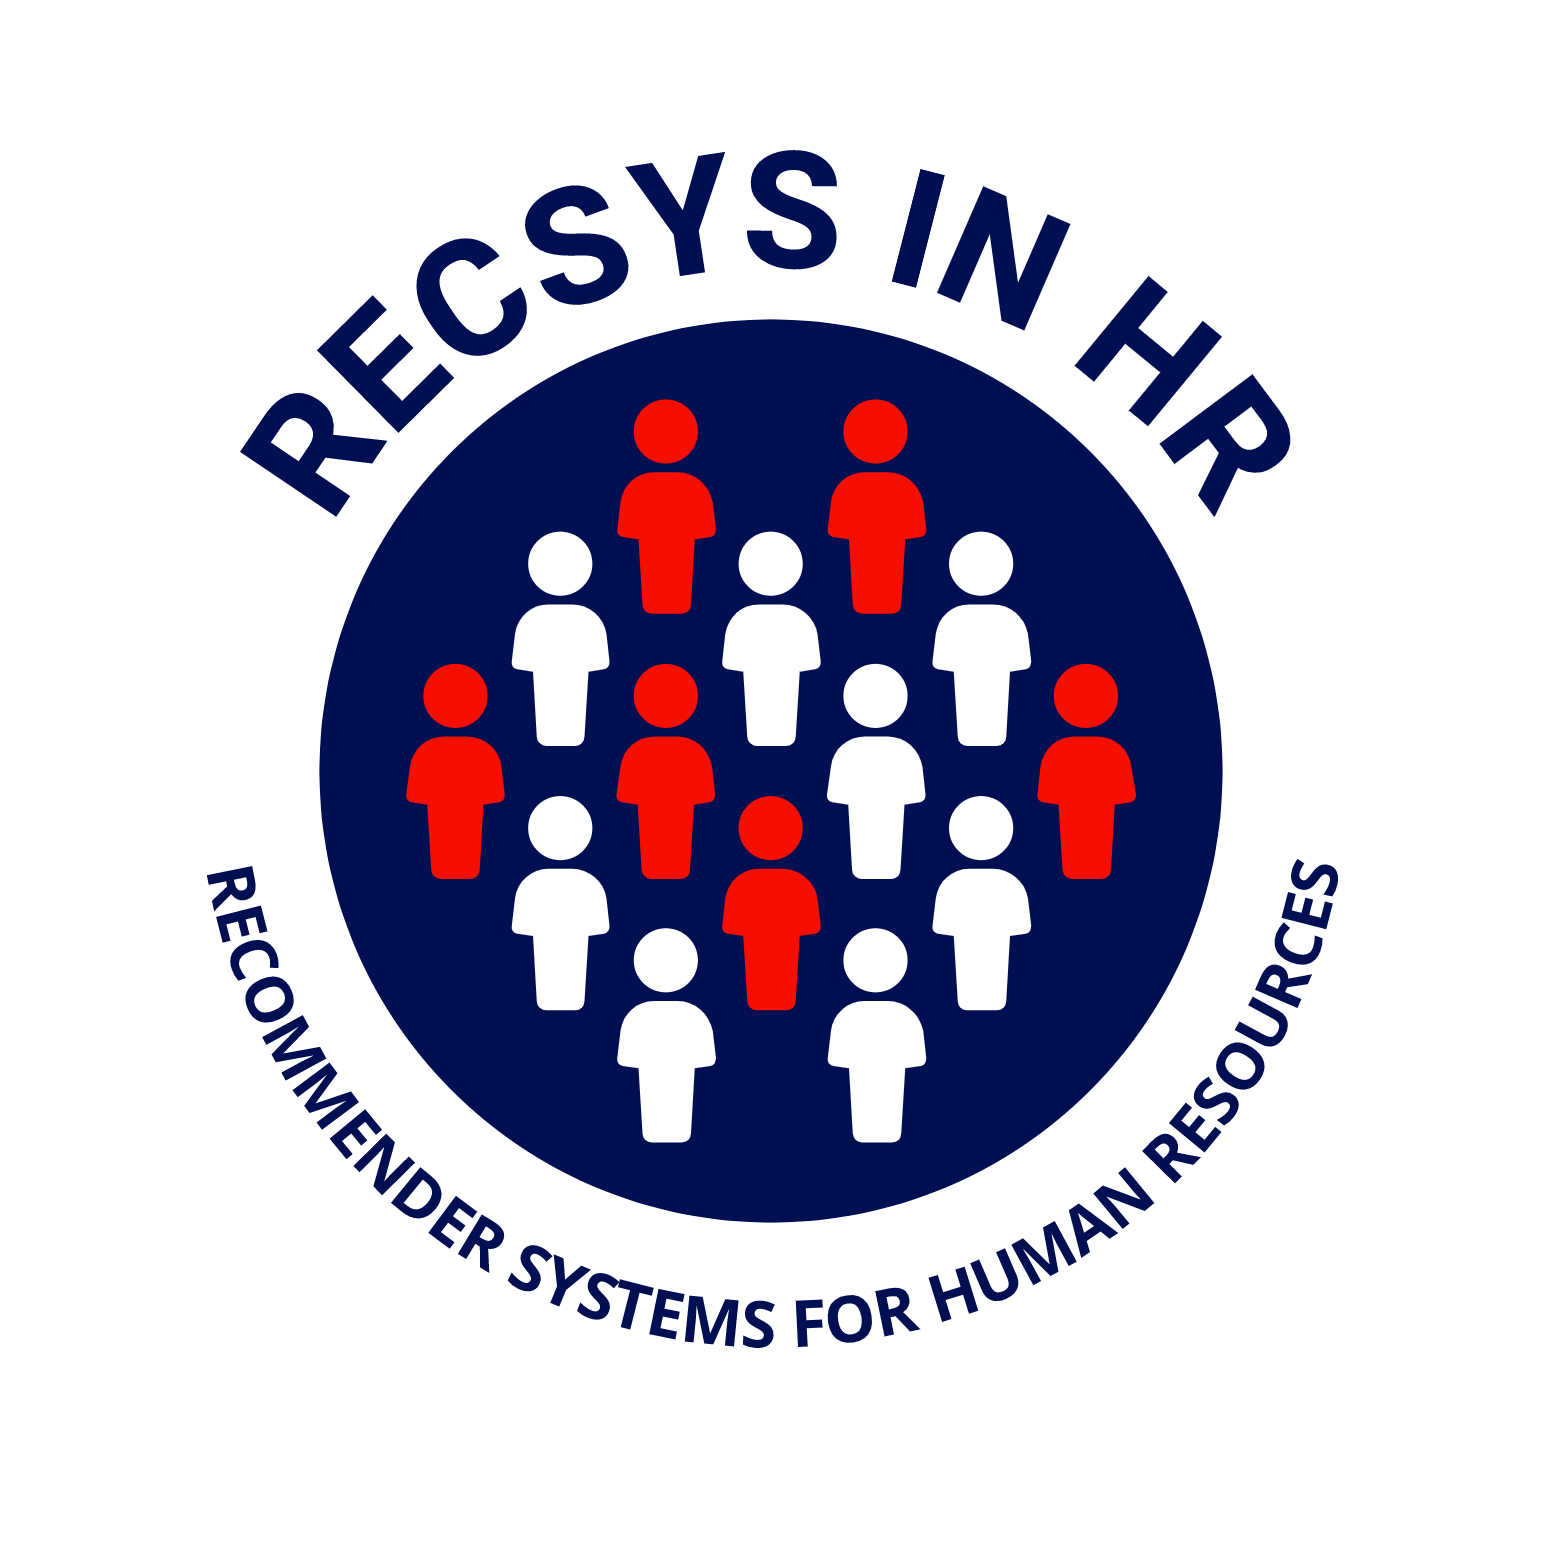 RecSys in HR 2022